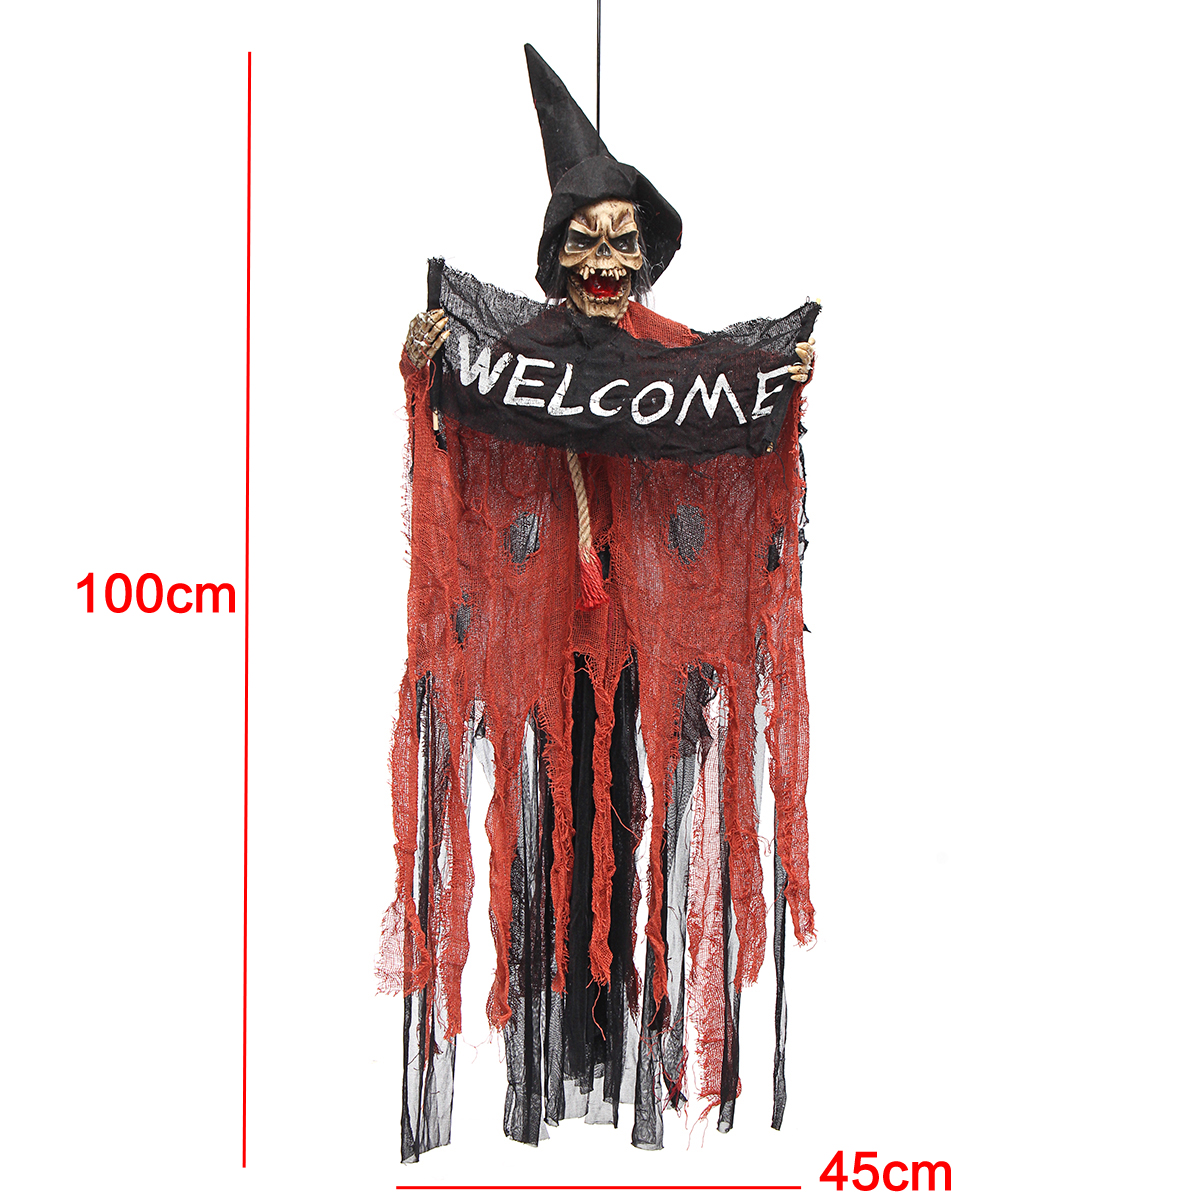 Halloween-Tools-Scary-Welcome-Sign-Hanging-Skeleton-Voice-Lights-Eyes-for-Halloween-Decorations-1340873-4